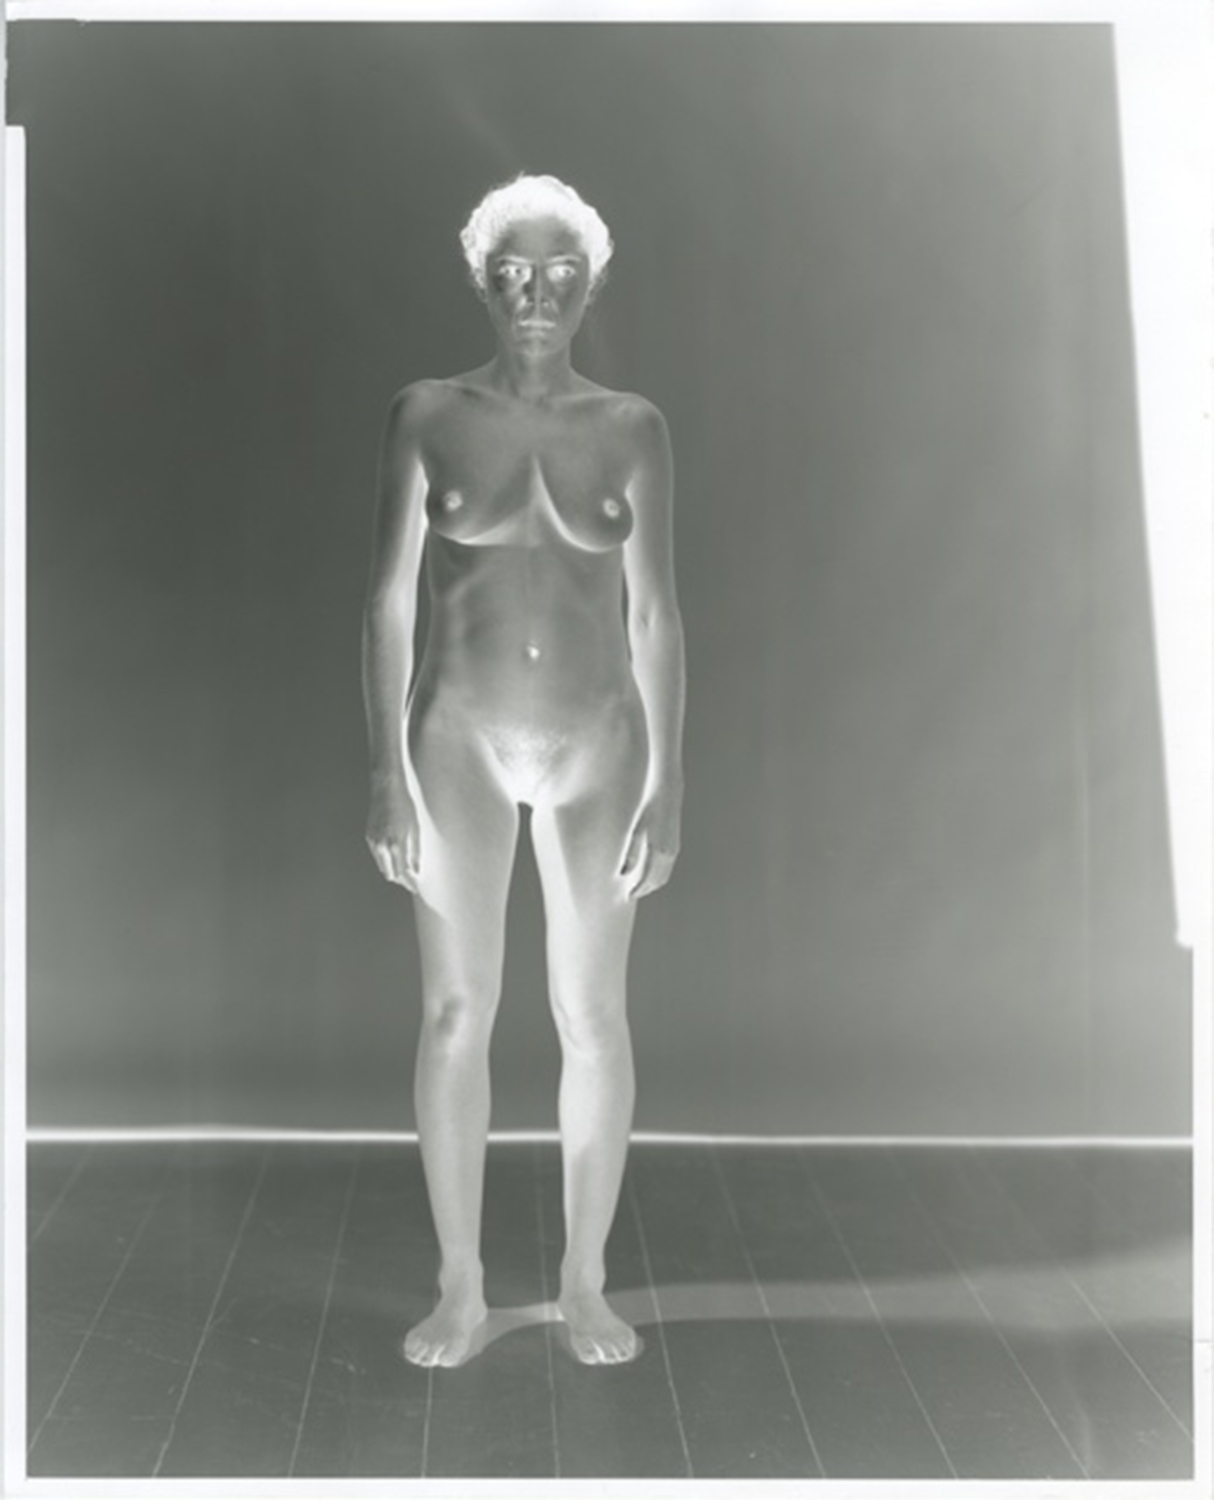  Dora Forbert, Untitled, ca 1942, From the Archive of Adela K., 8 x 10 inches, C-41 print, edition of 8, 2011 